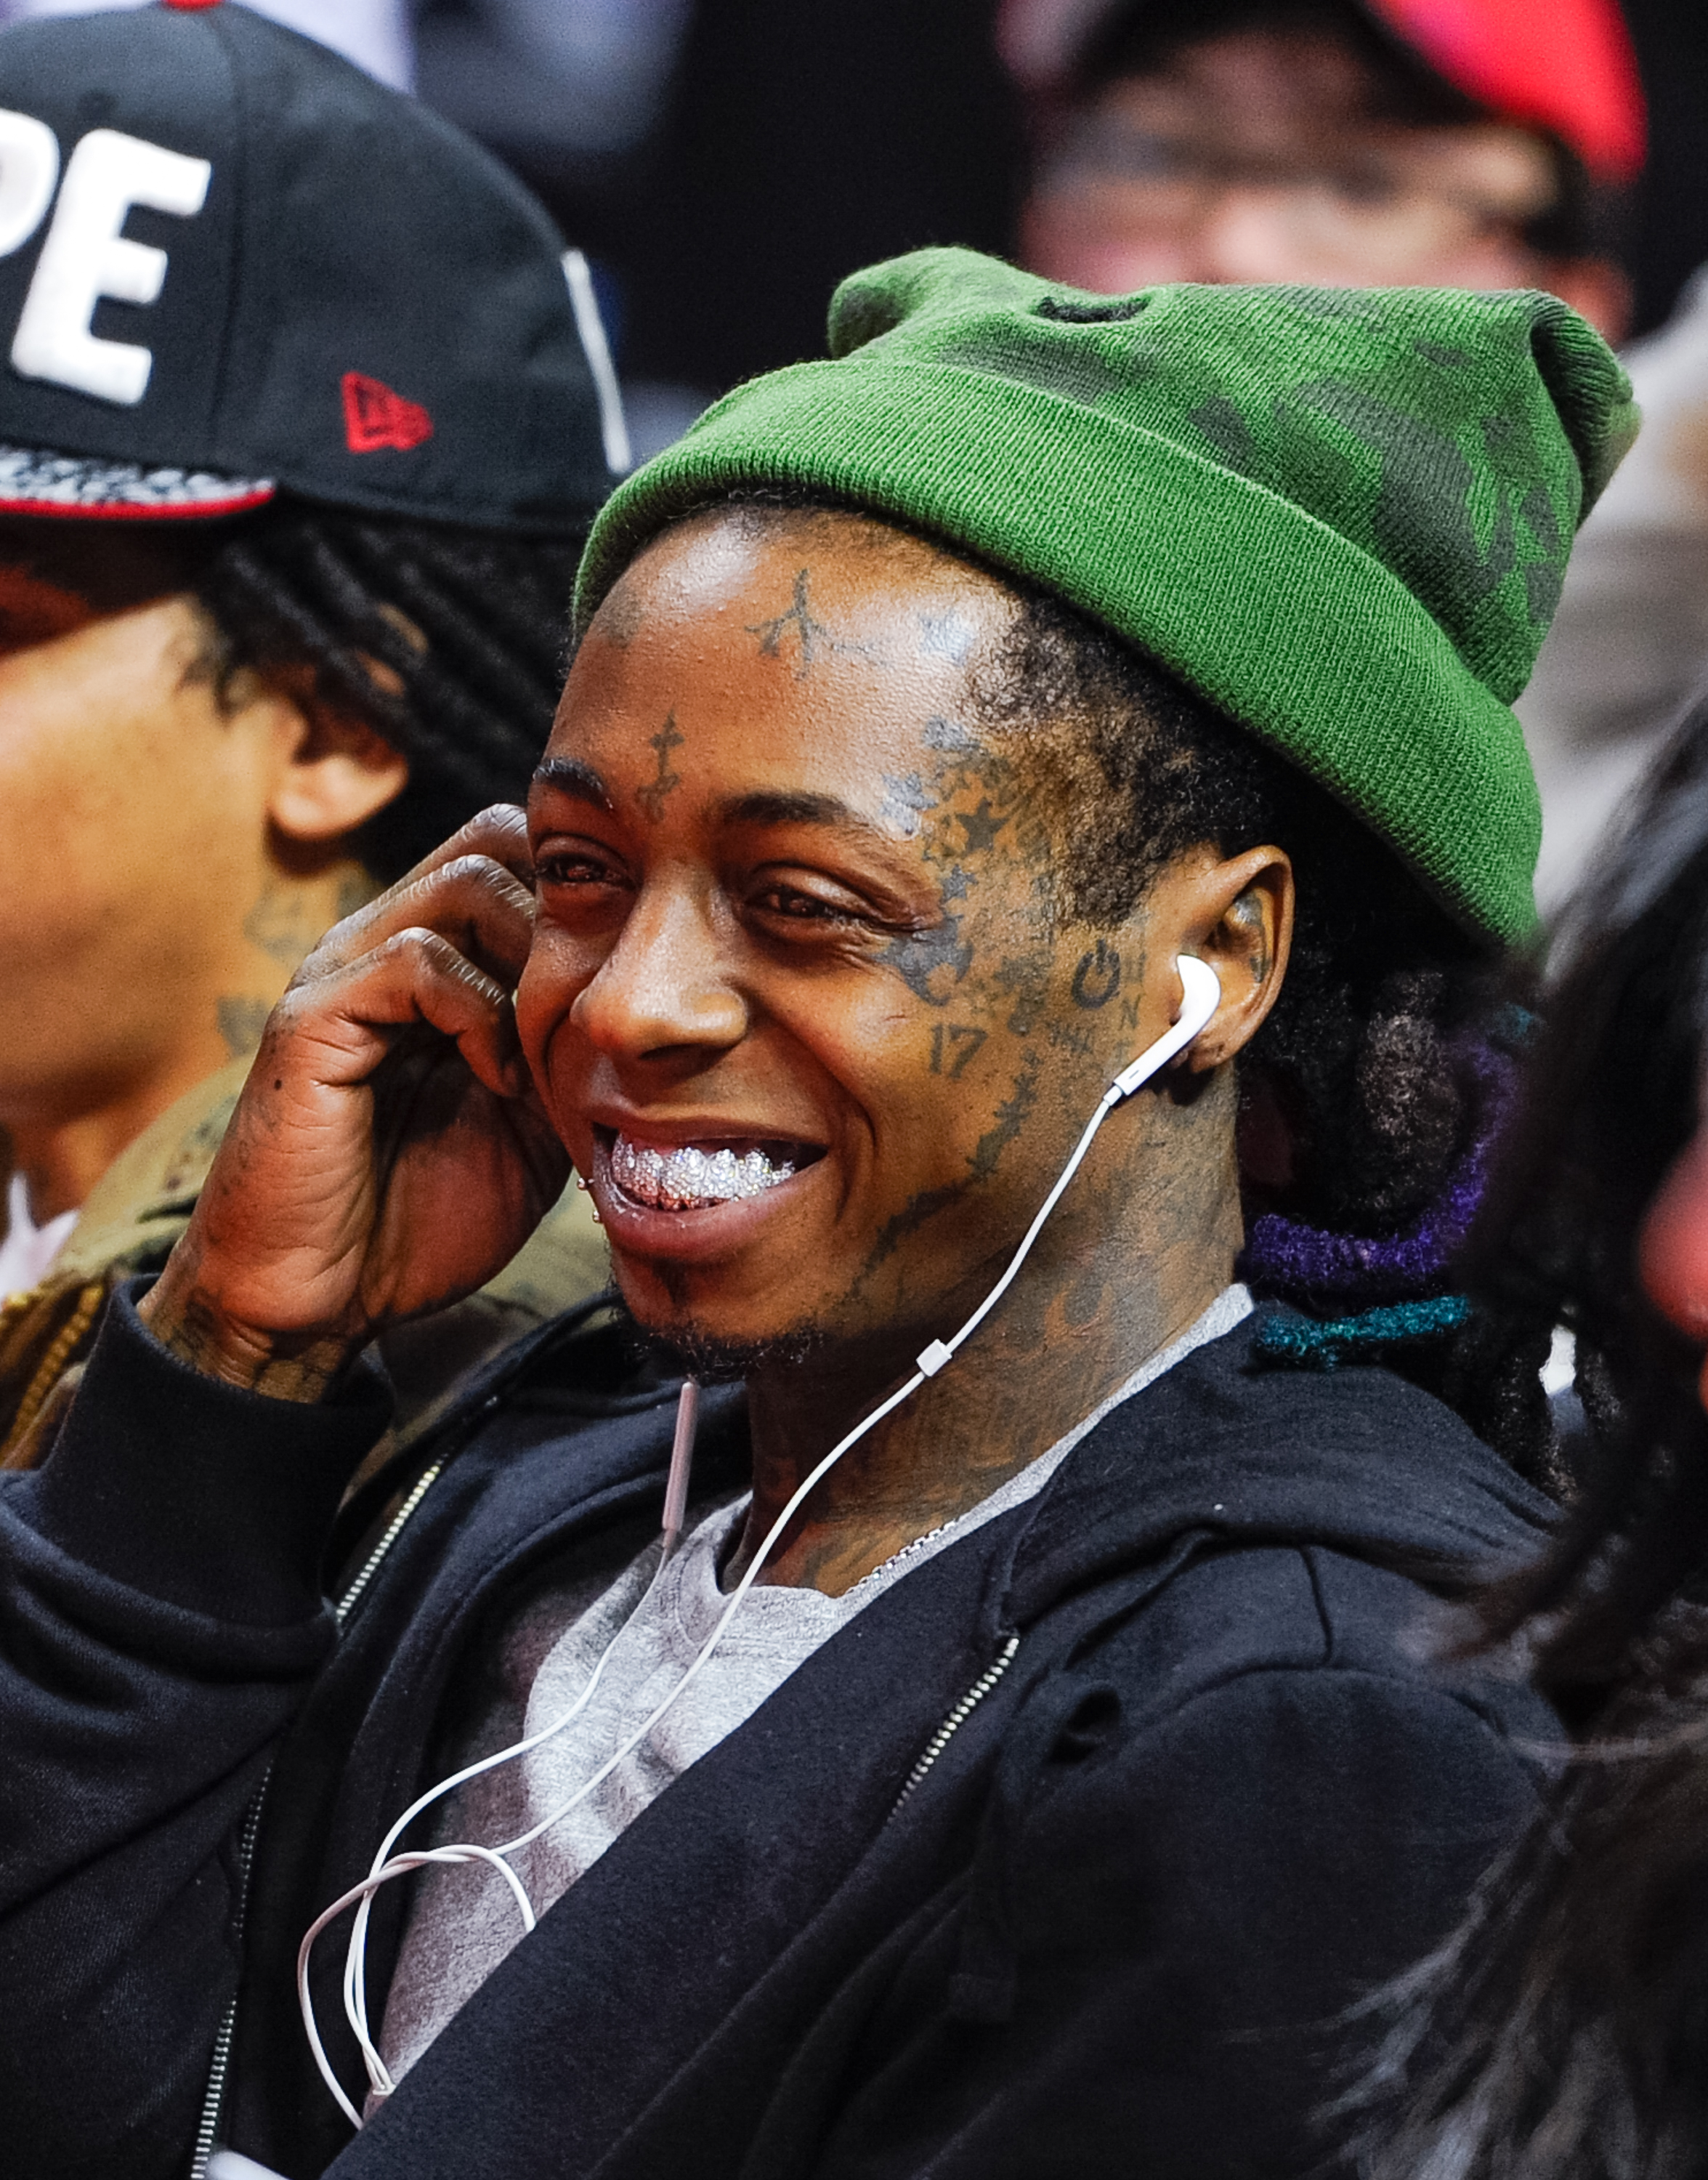 Lil Wayne attends a basketball game between the Indiana Pacers and the Los Angeles Clippers at Staples Center on Dec. 17, 2014 in Los Angeles, Calif. (Noel Vasquez—GC Images/Getty Images)